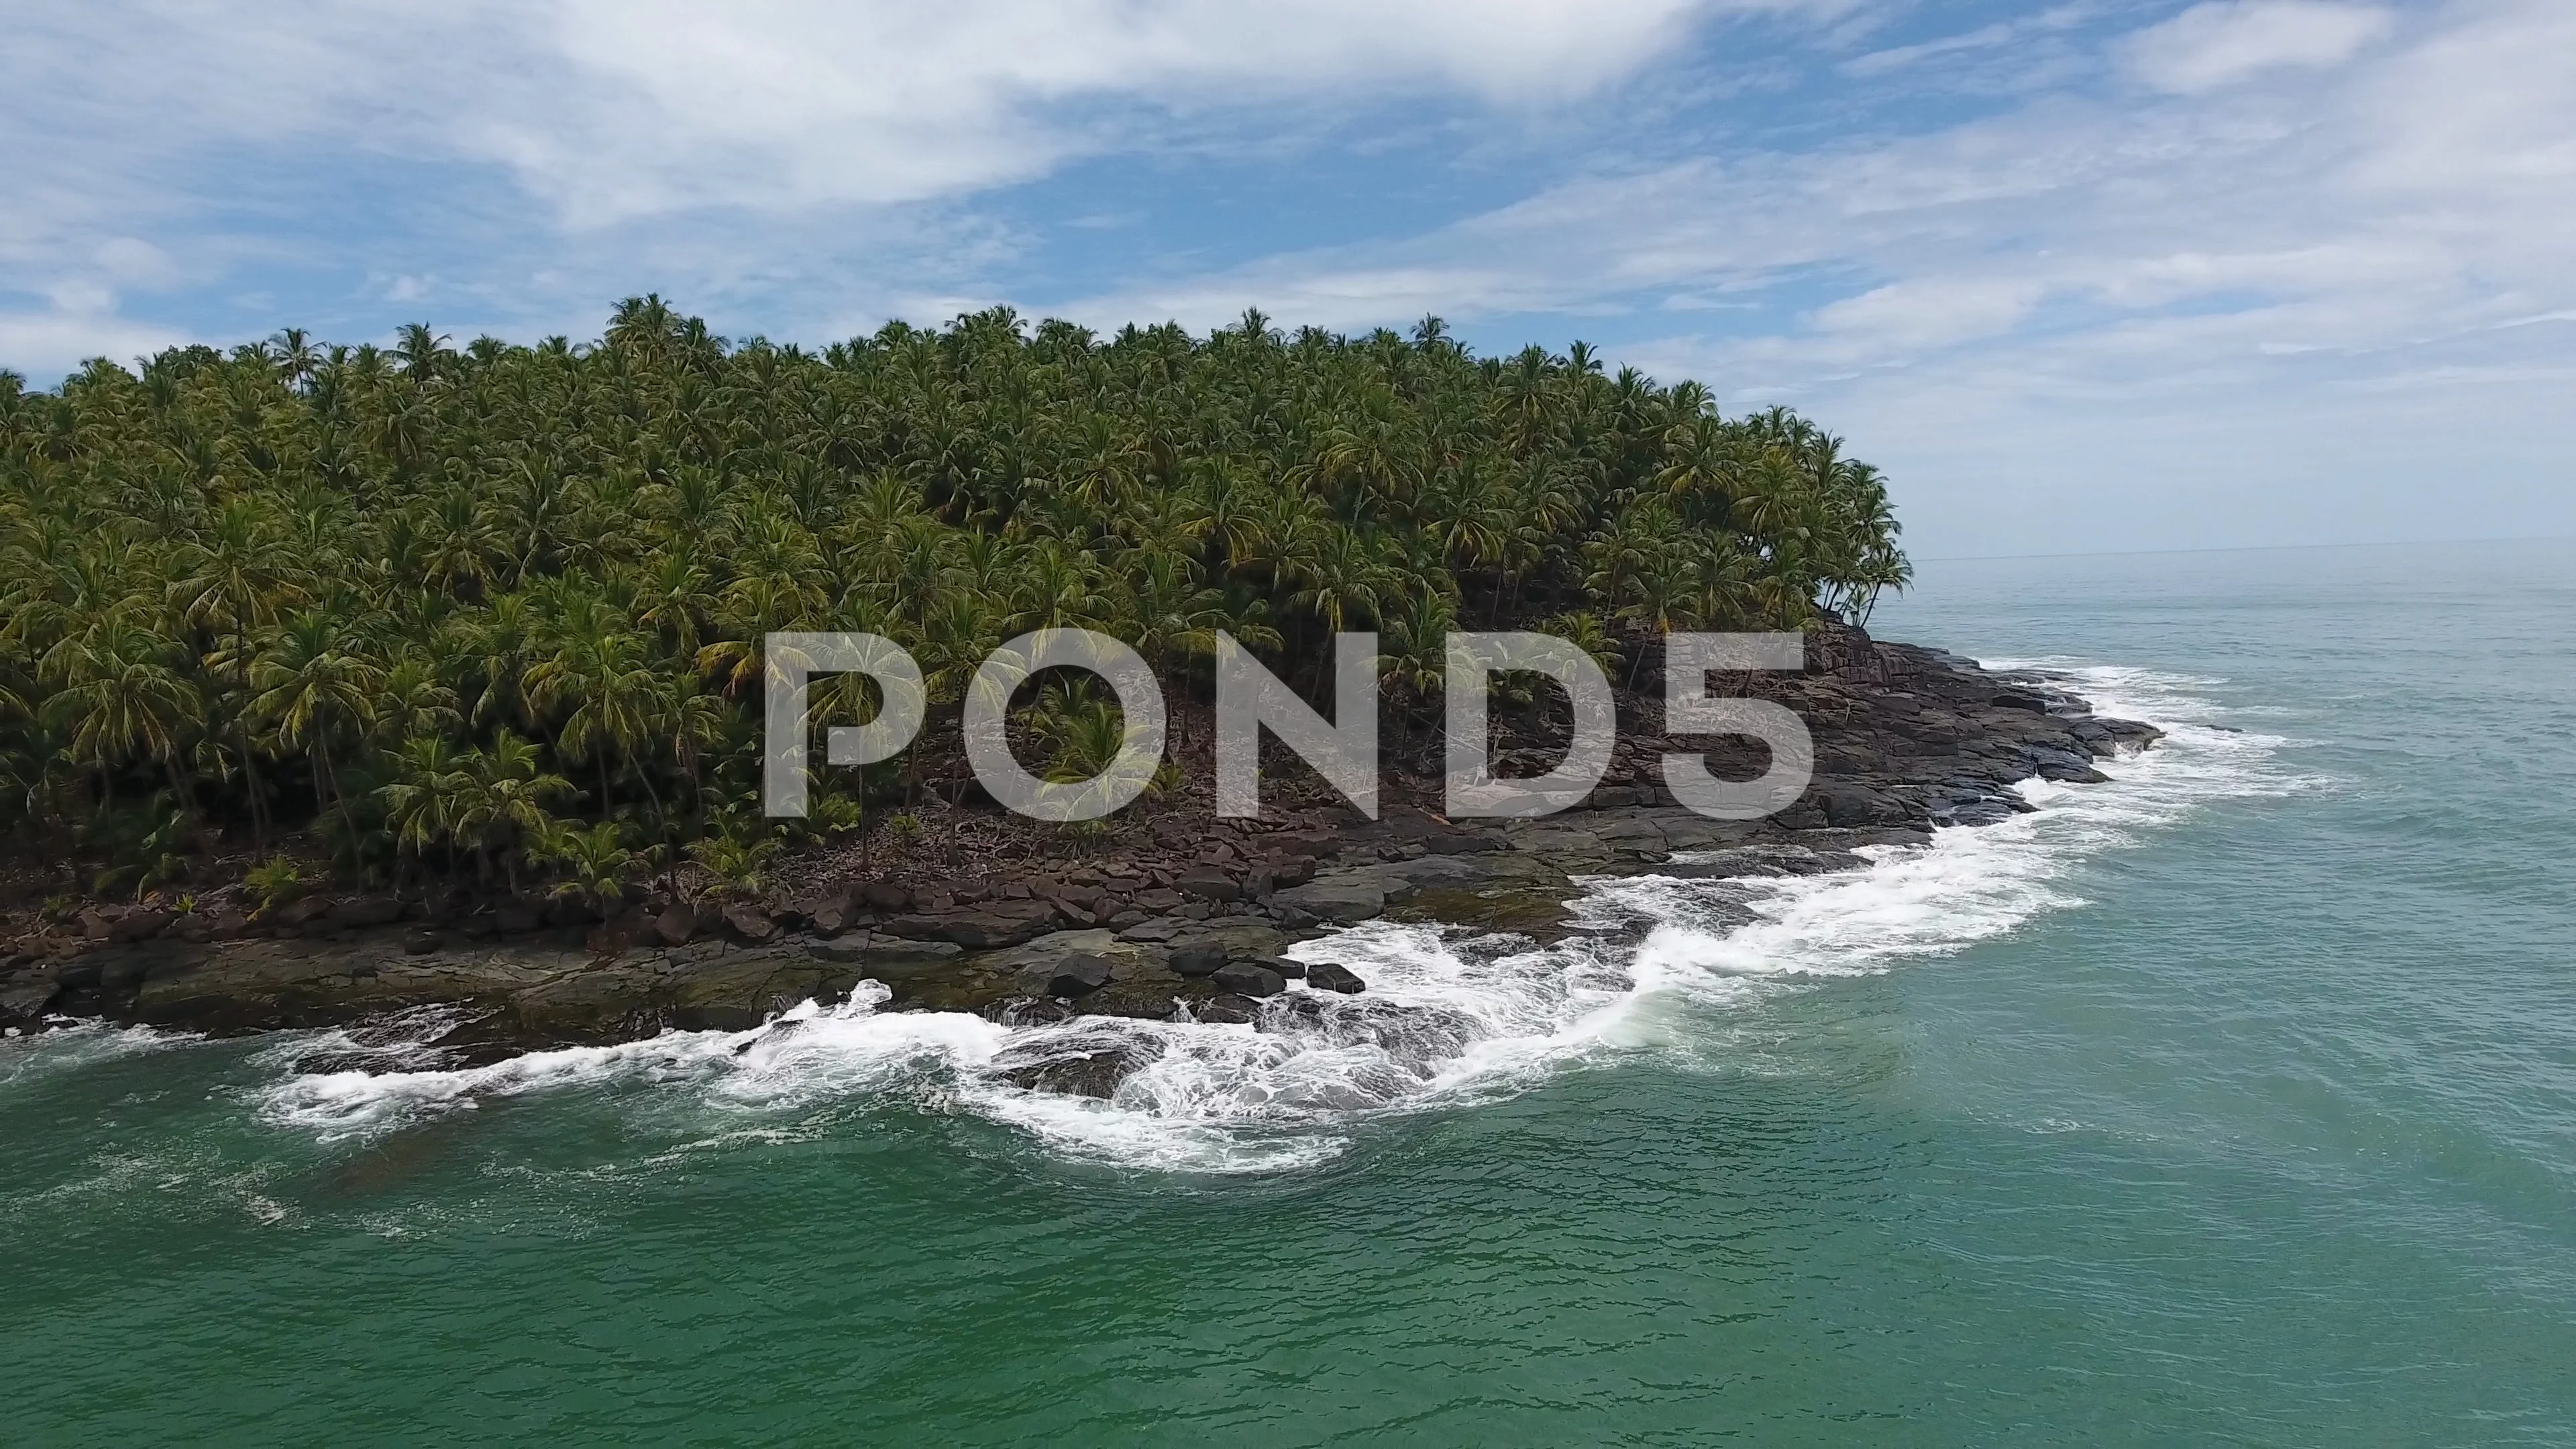 Devils Island, French Guiana, Map, & Facts